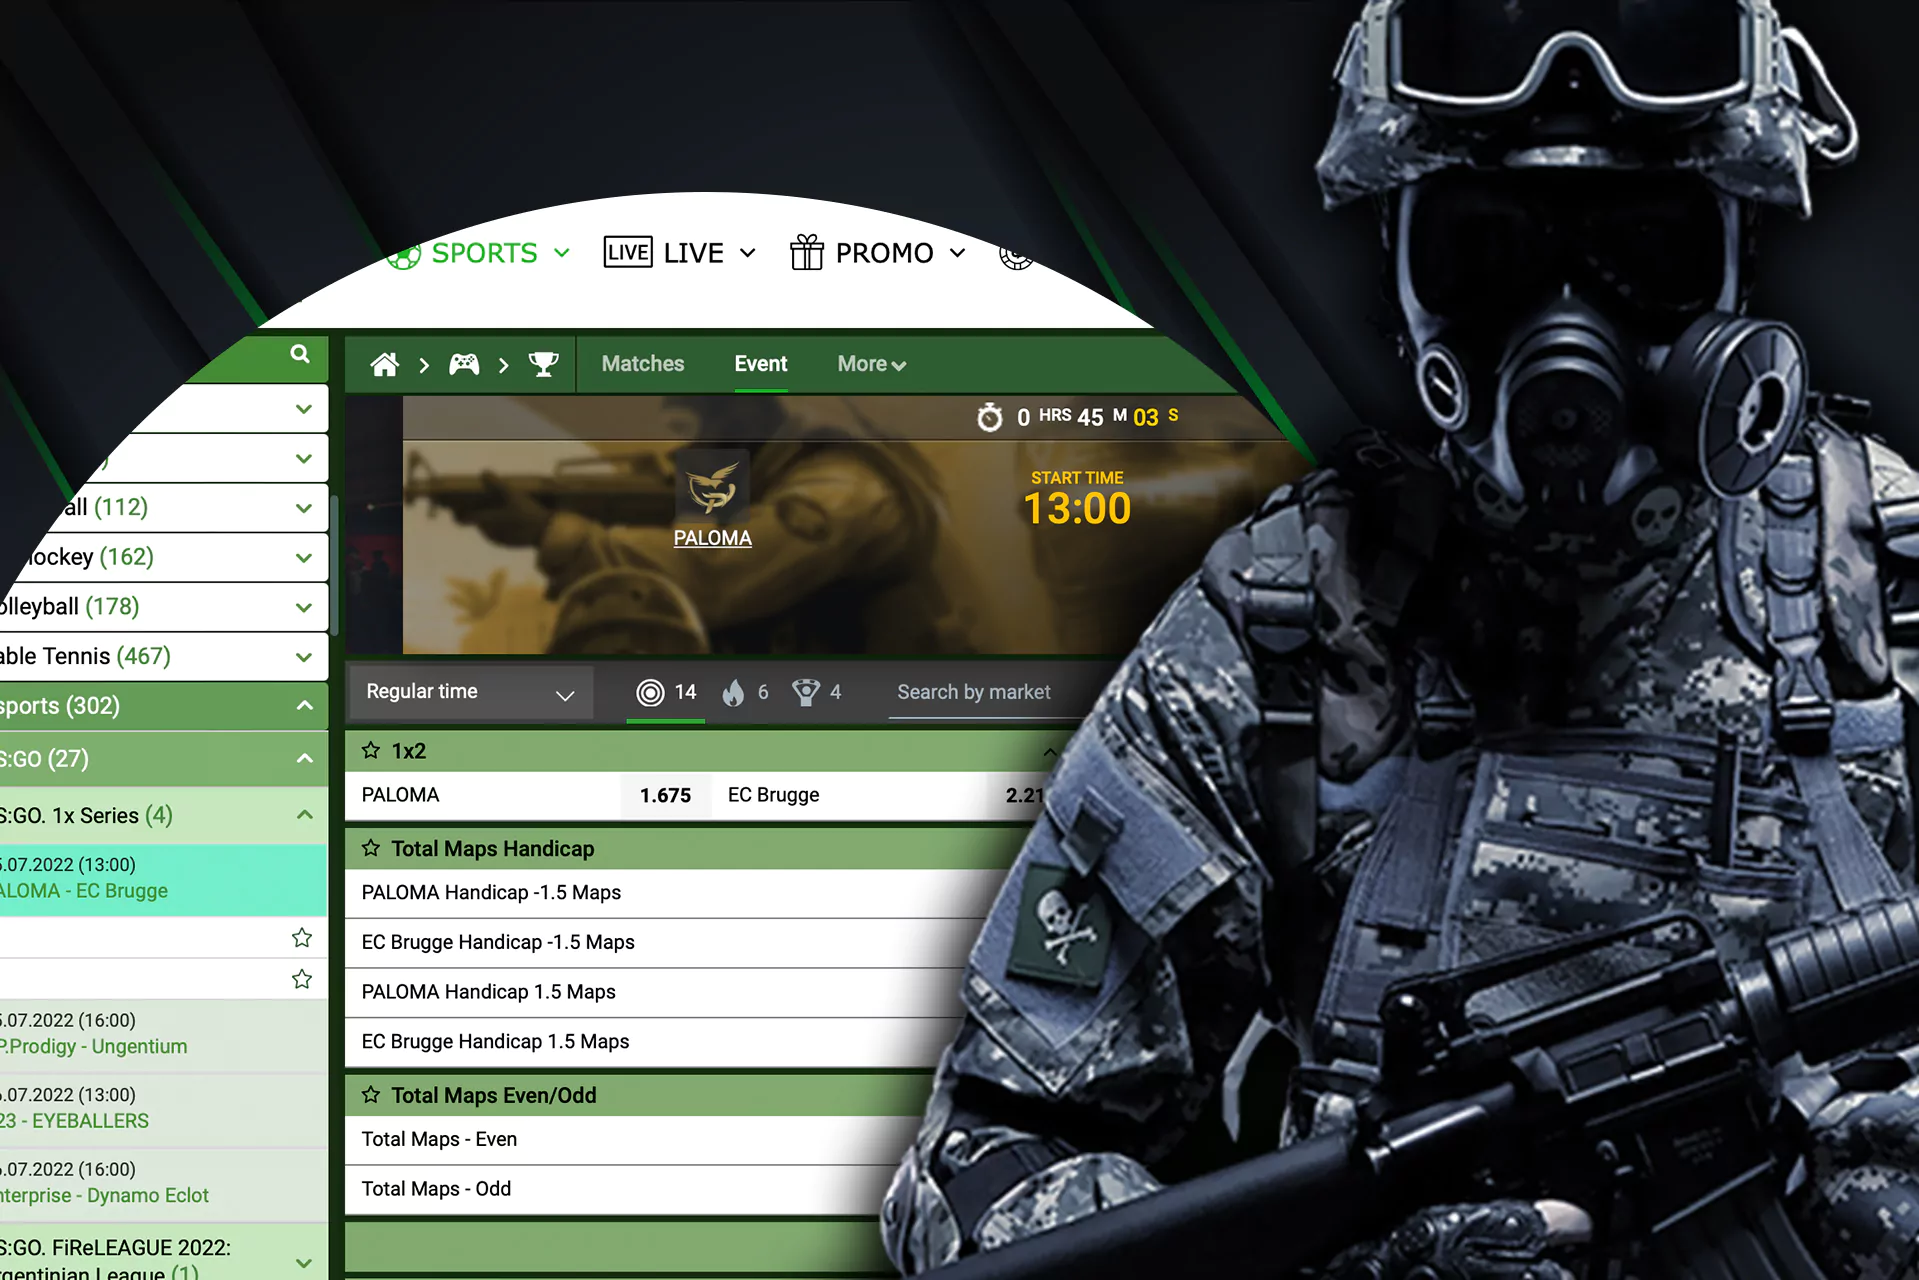 You can watch CS:GO streamings on the Linebet site and bet on it.